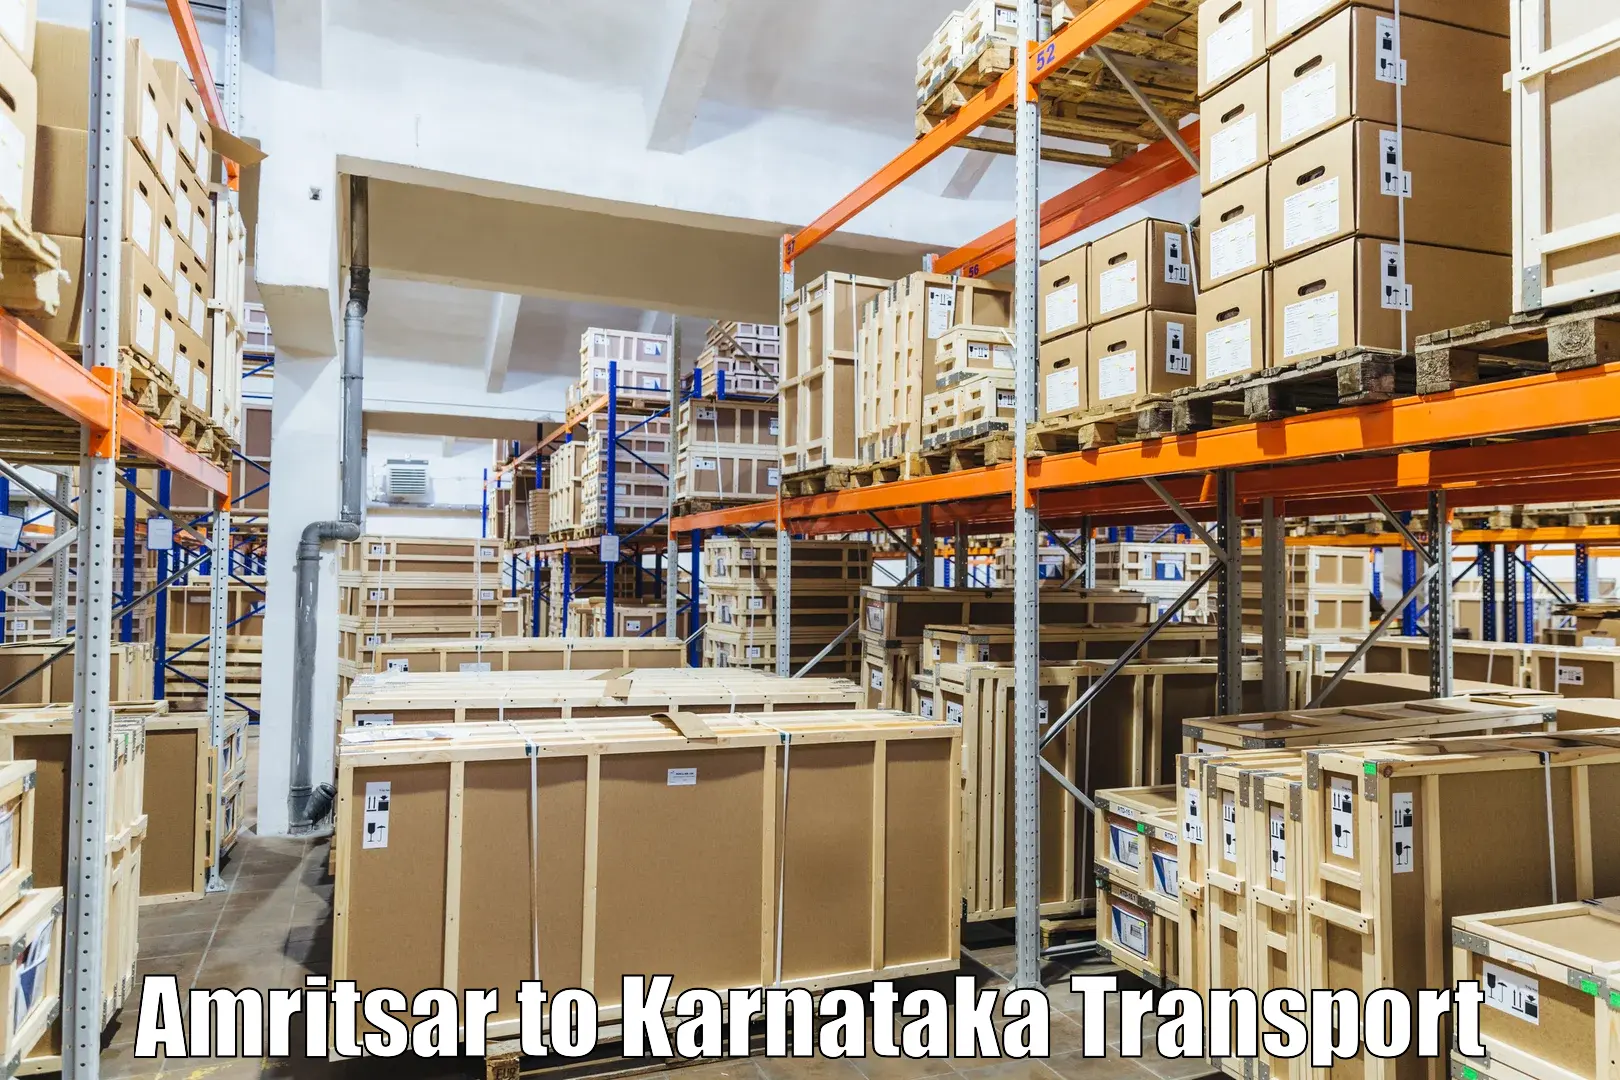 Container transport service Amritsar to Bangalore